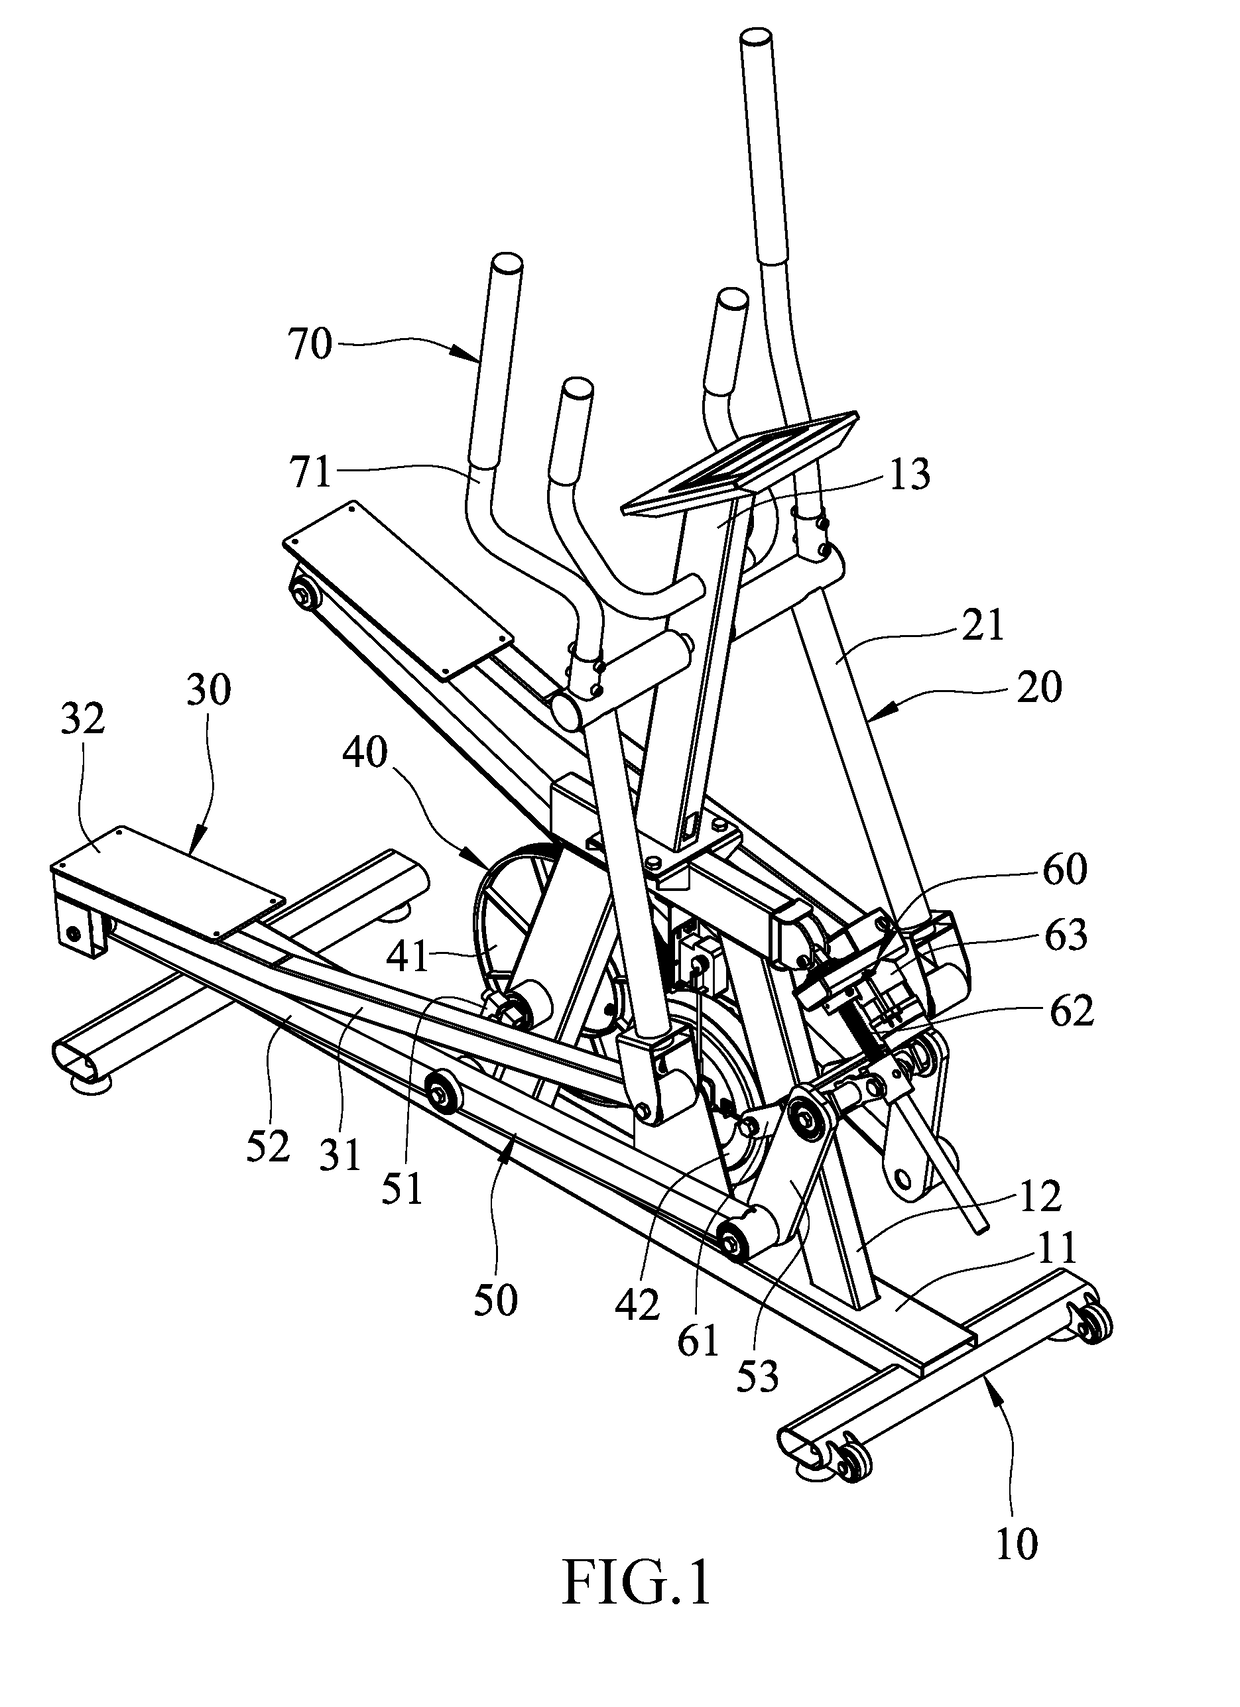 Climbing exerciser machine with adjustable inclination